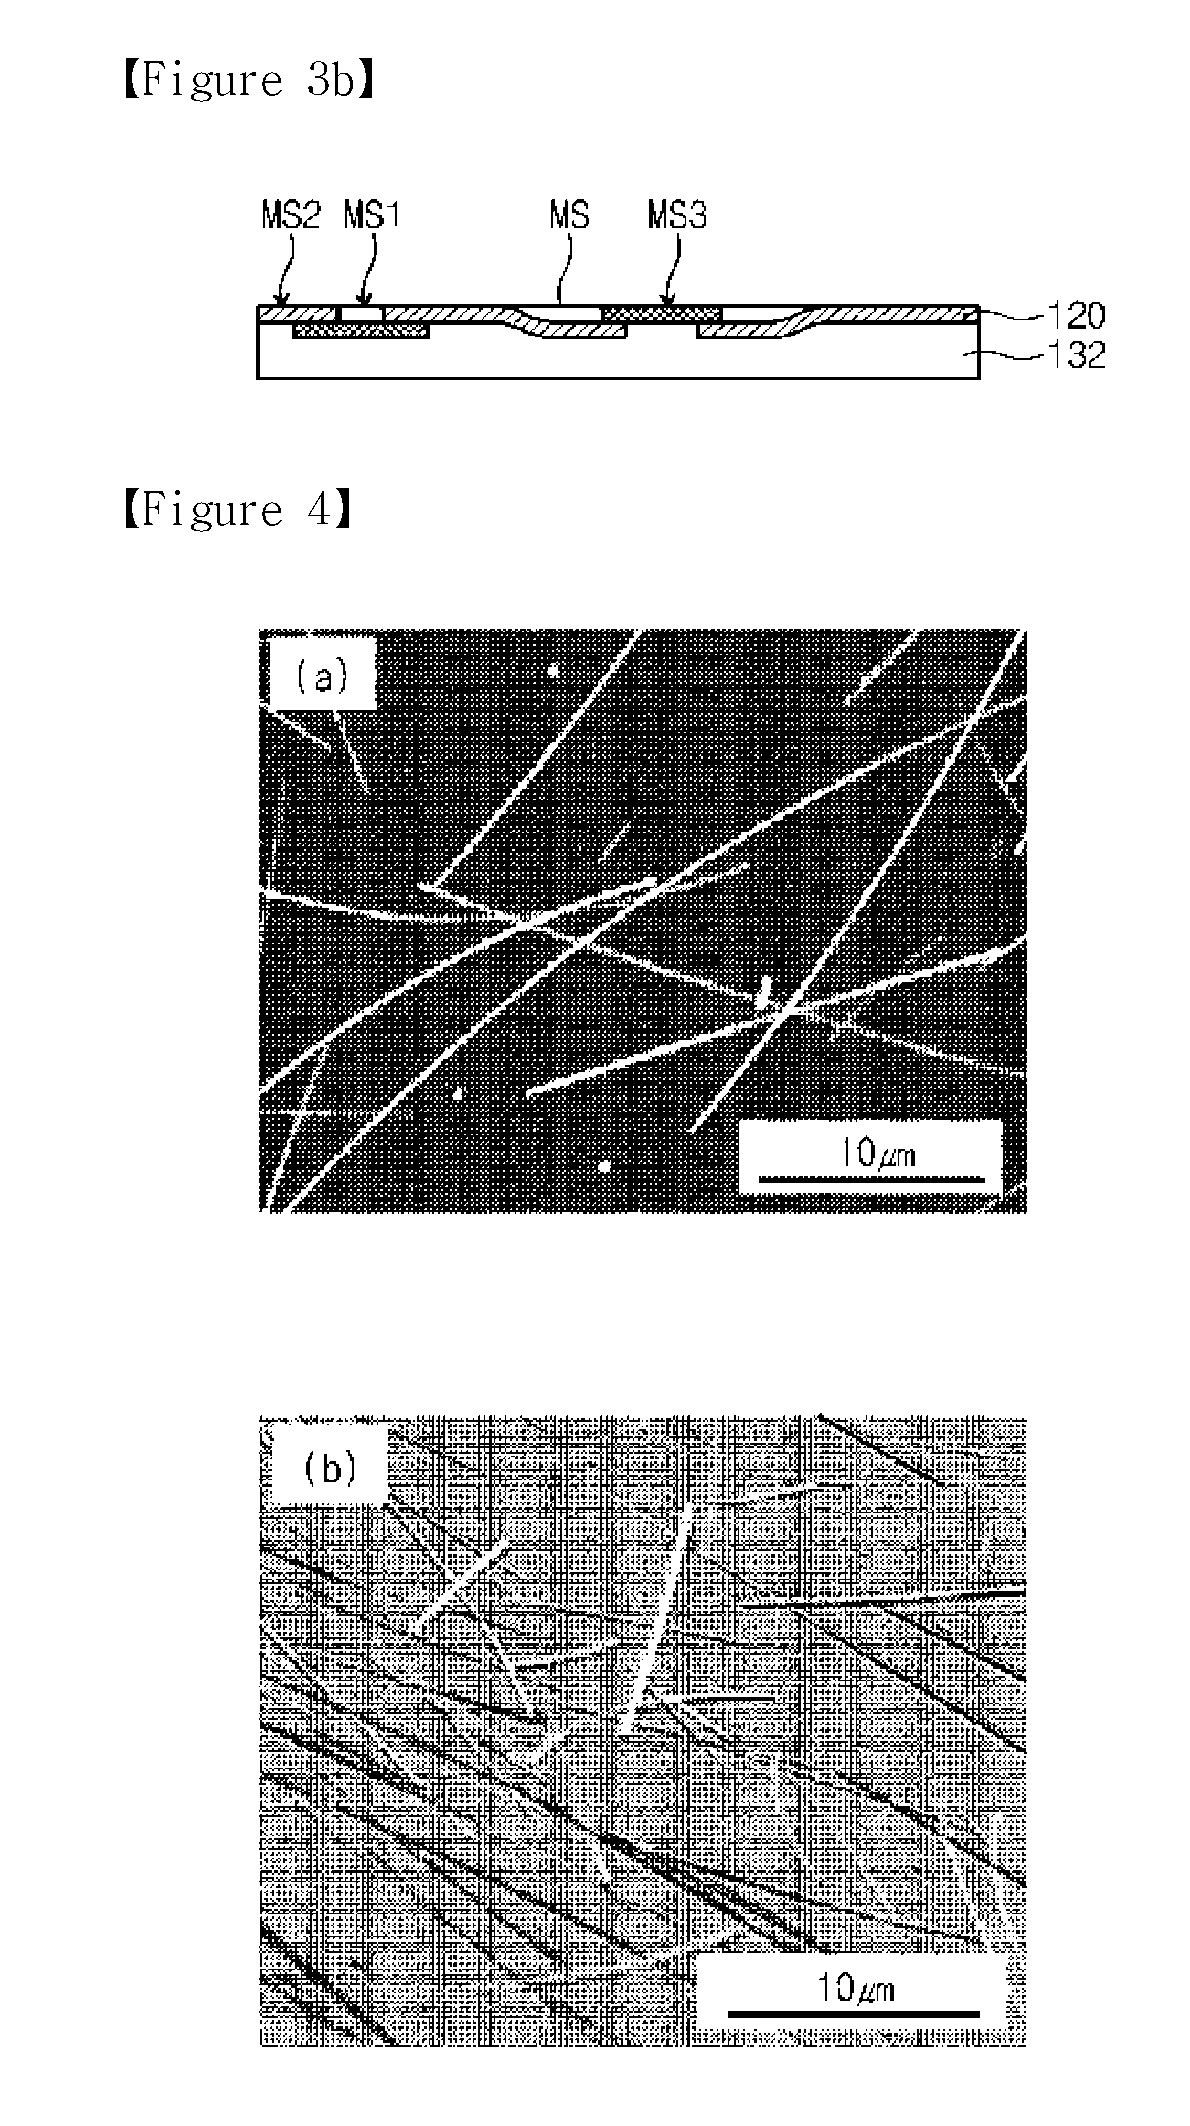 Substrate Including Nano/Micro Structure, Method for Manufacturing the Same, Method for Refining Nano/Micro Structure, Method for Manufacturing Nano/Micro Structure Network, and Manufacturing Apparatus Therefor